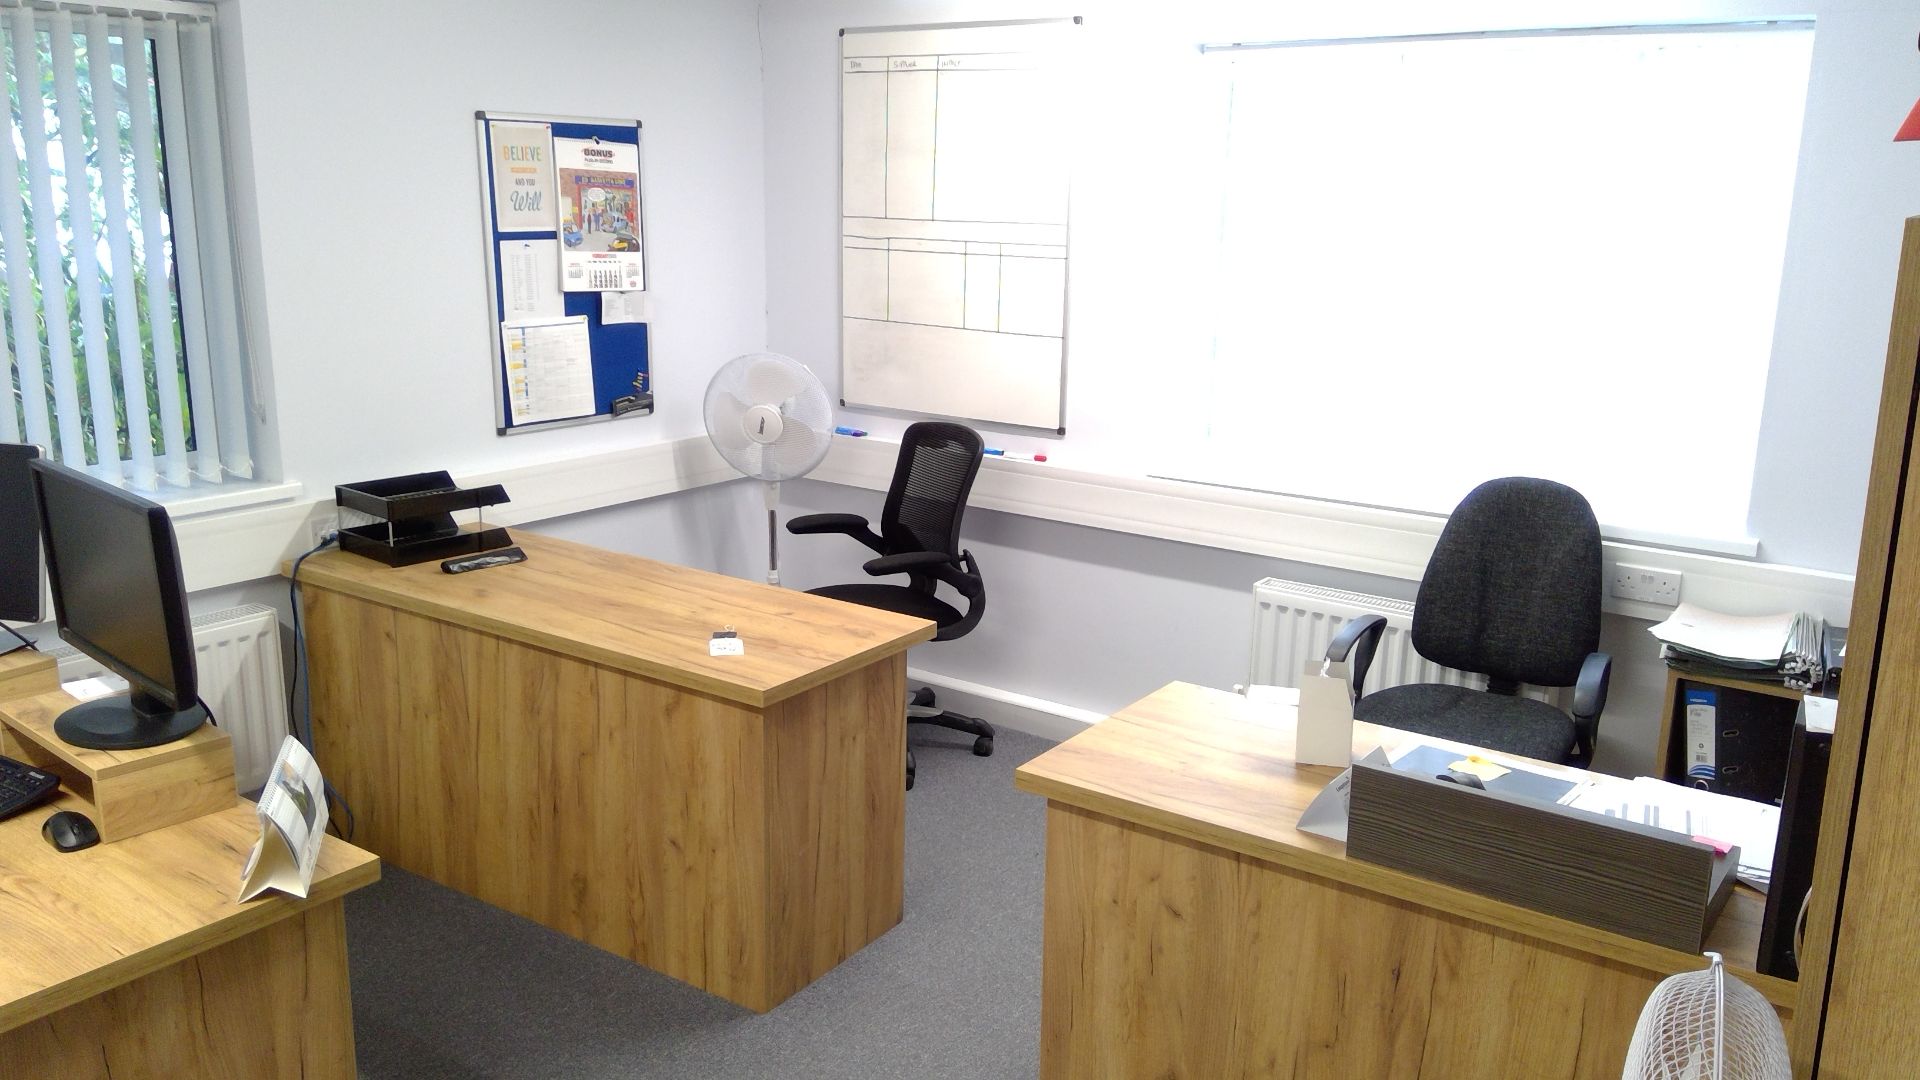 Contents of office 10 to include 3 No oak effect single pedestal desks , 1 stationary cupboard, 5 No